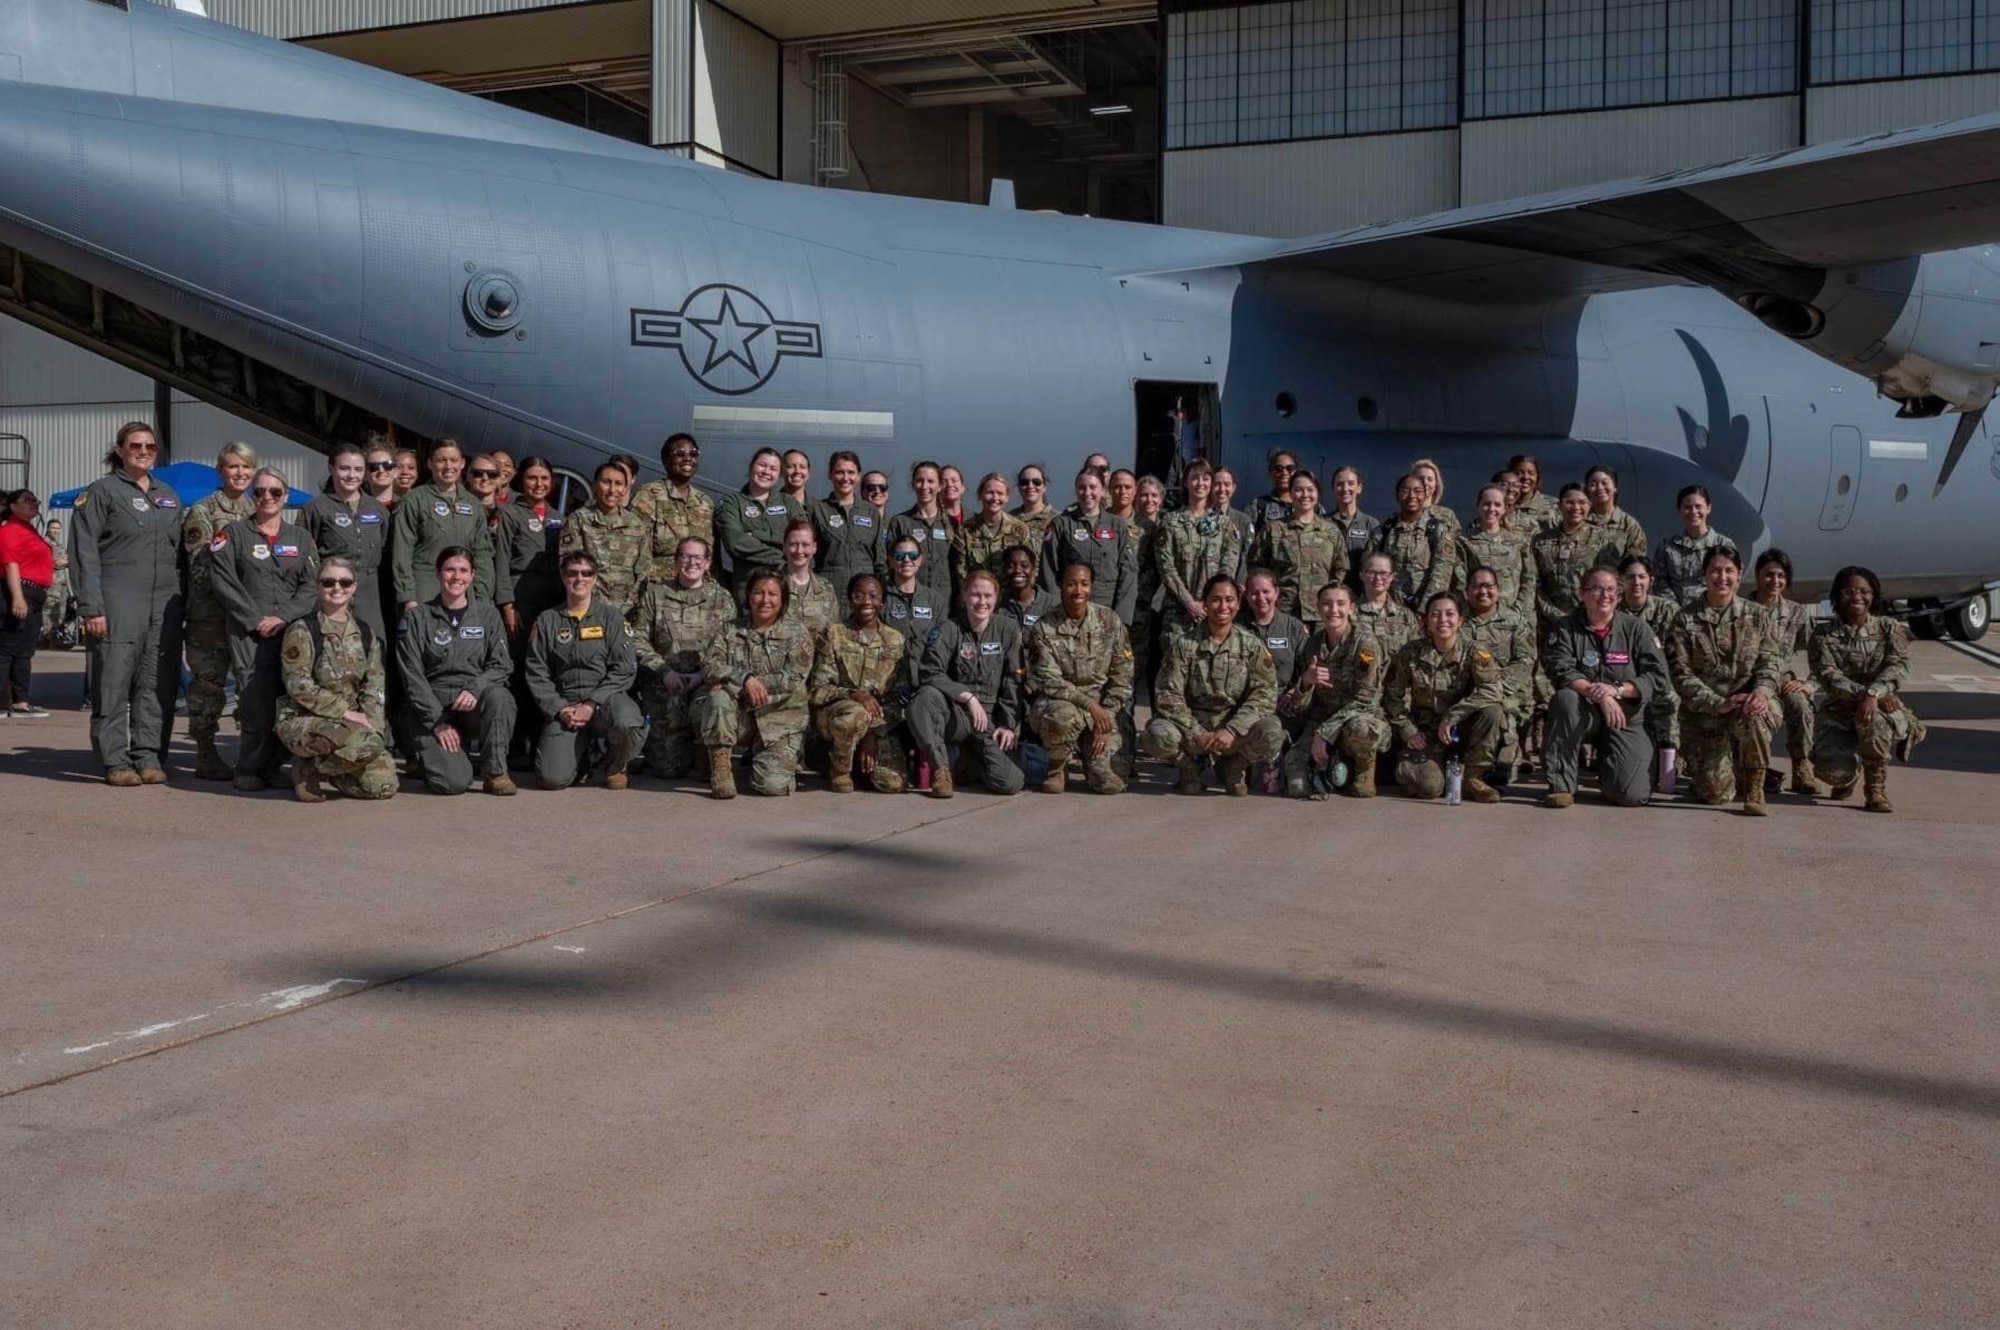 Participants in the Dyess Air Force Base, Texas, Women’s Summit pose for a photo in front of a Lockheed Martin C-130J Super Hercules, April 28, 2022. More than 100 women participated in the event to celebrate the 80th anniversary of the Women Air Force Service Pilots. (Courtesy photo)